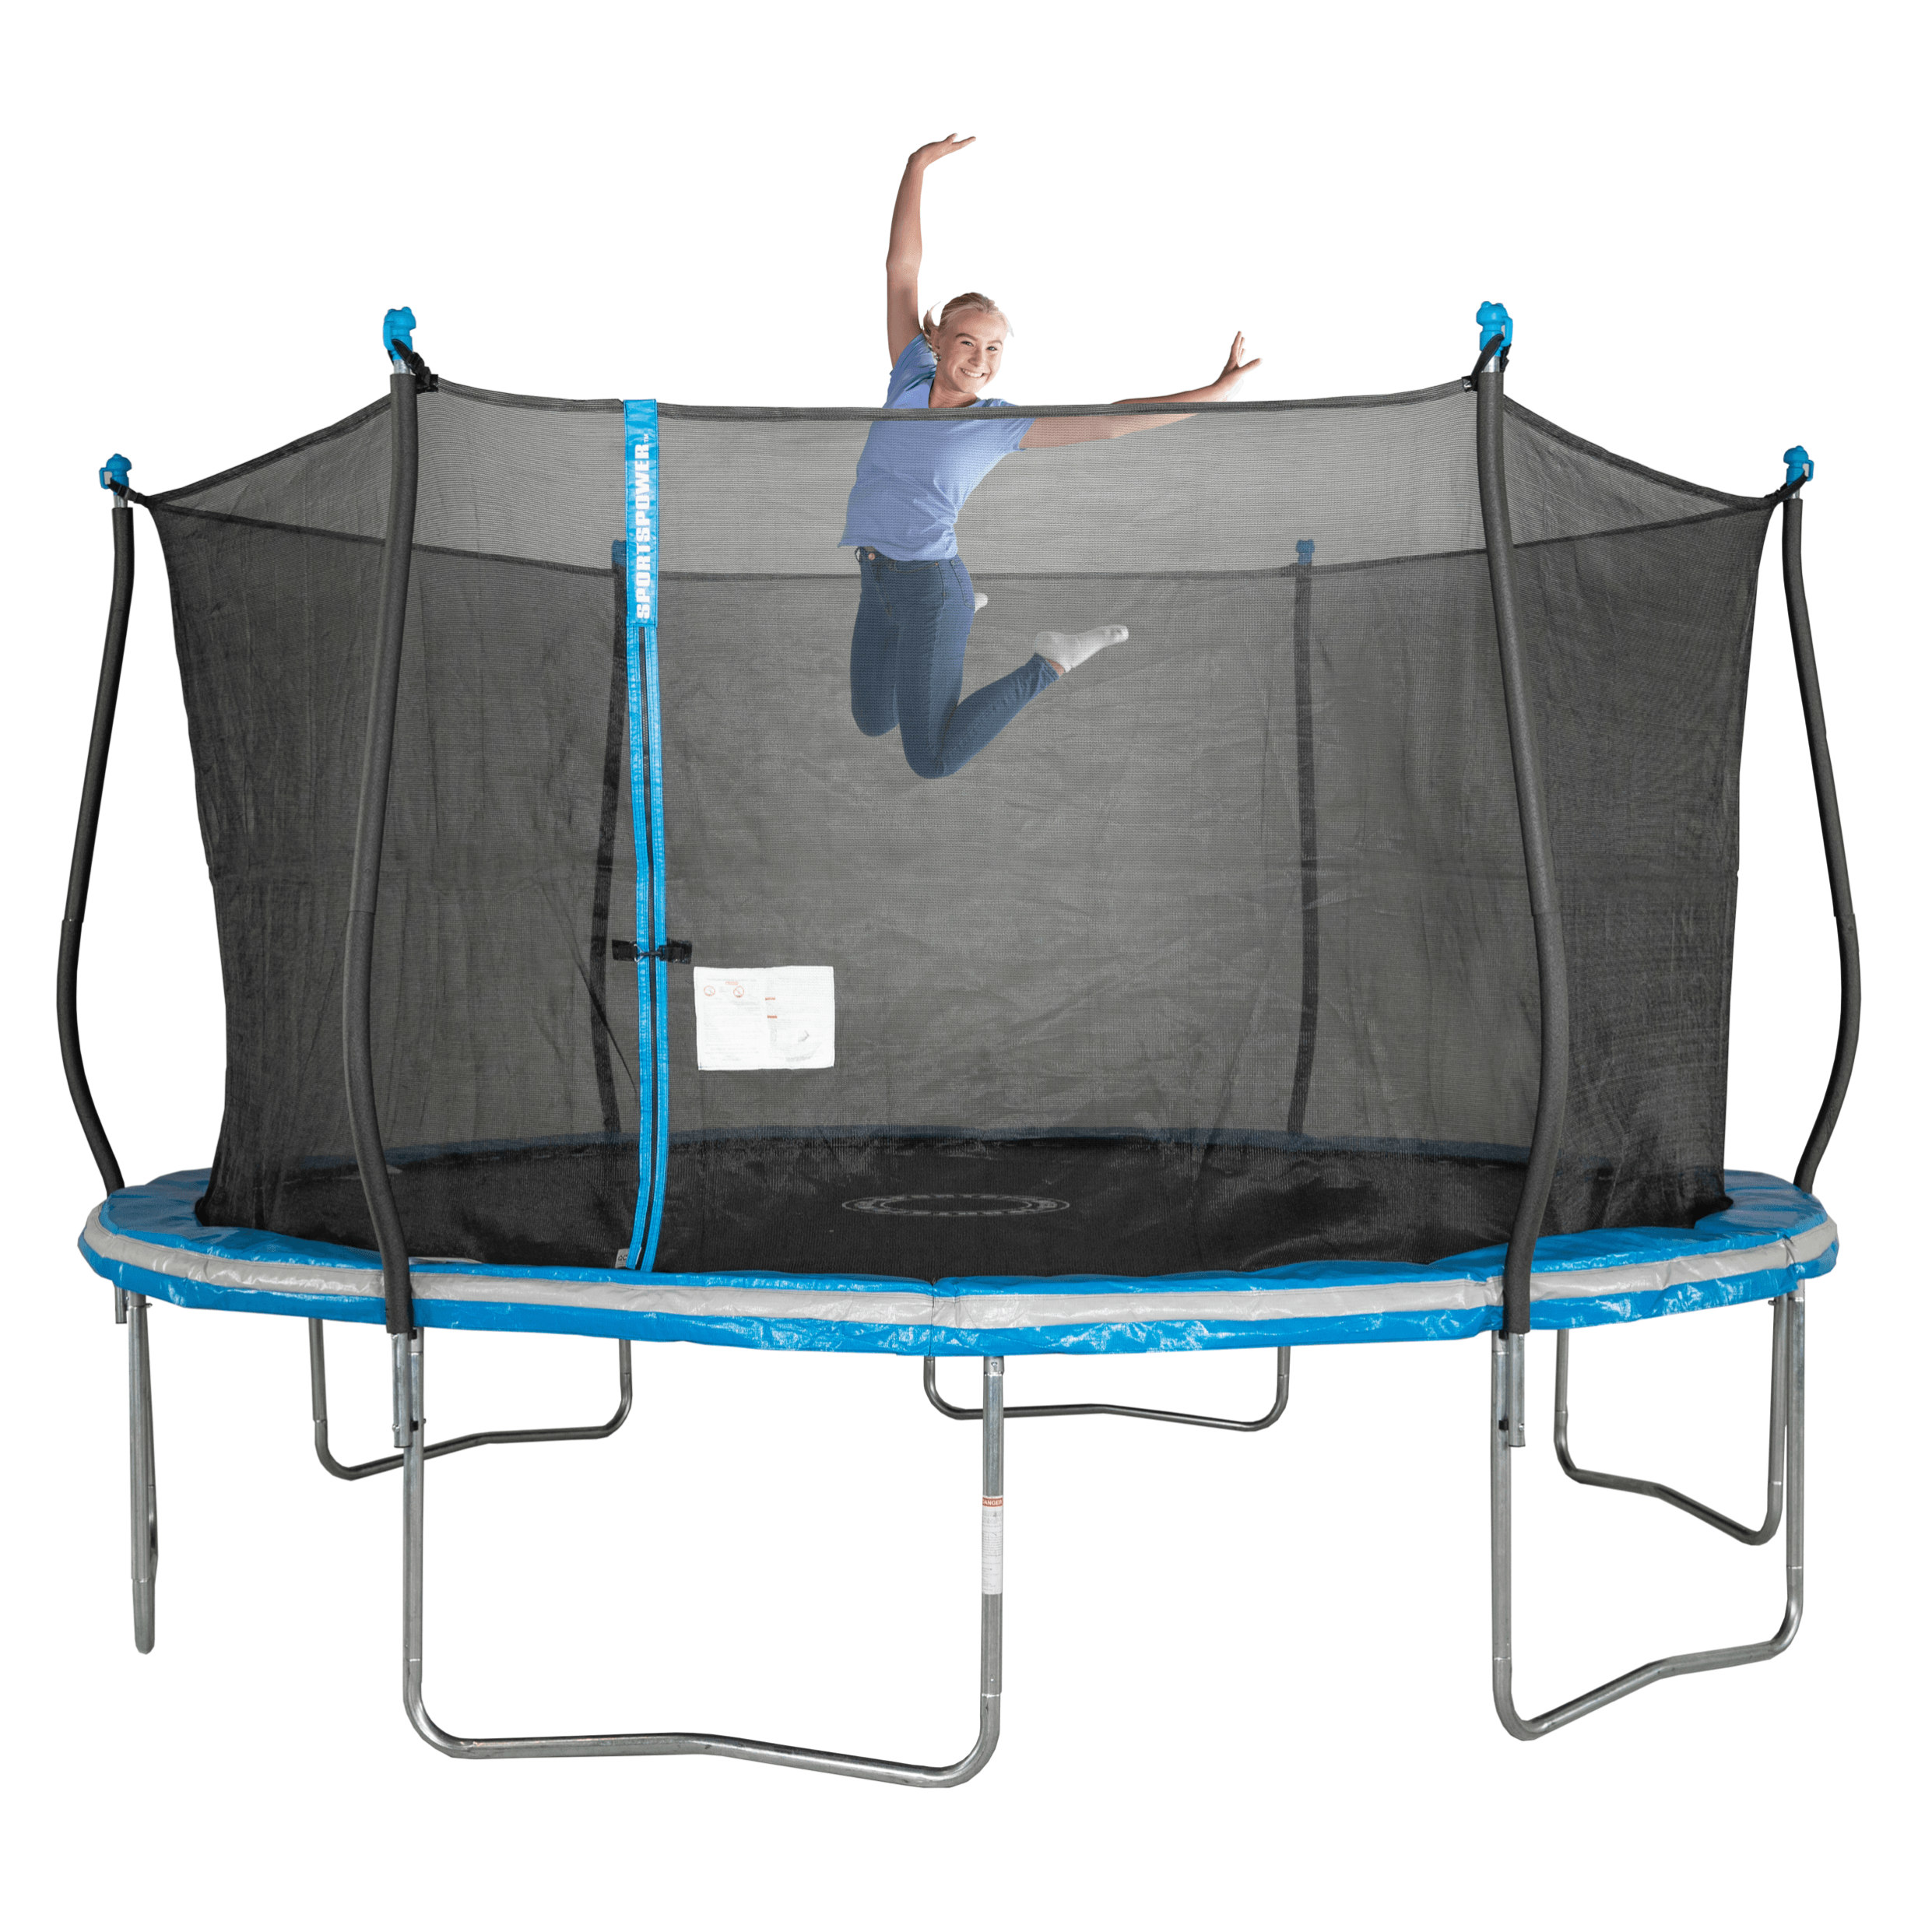 Bounce Pro 14' Trampoline, Classic Safety Enclosure, Blue - image 1 of 8